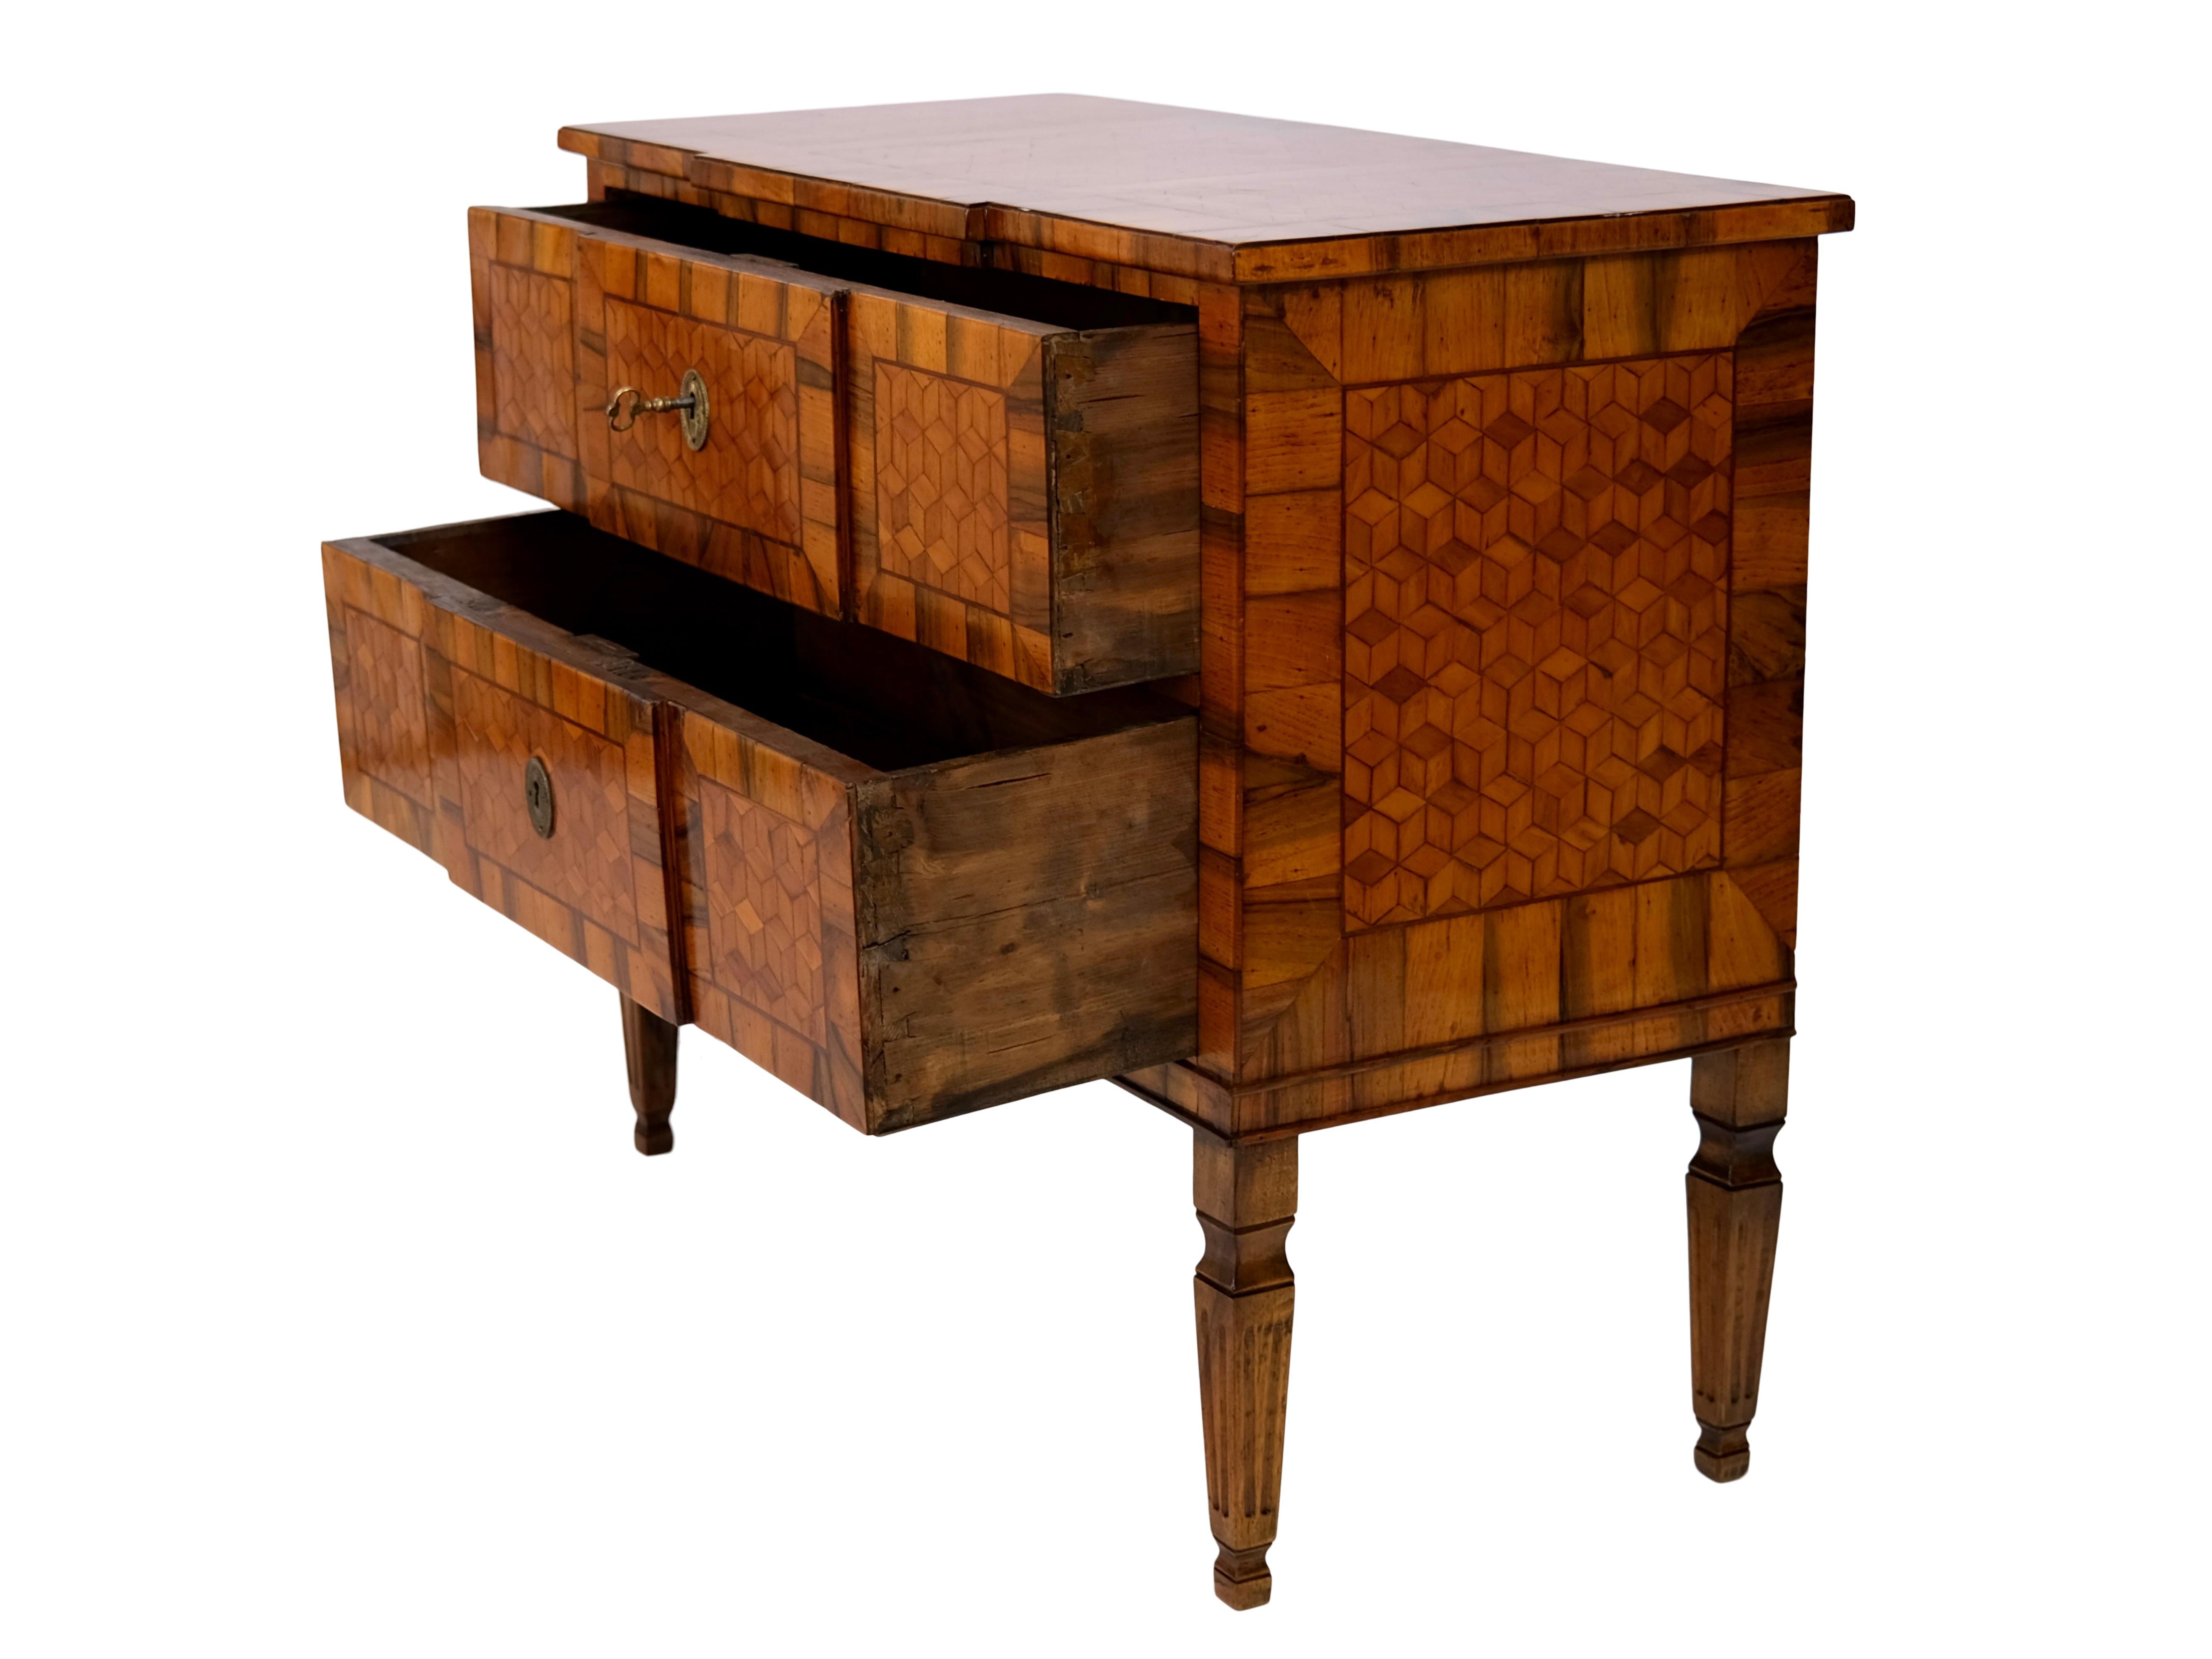 French Handpolished 1830s Louis Seize XVI Style Chest of Drawers in Nutwood